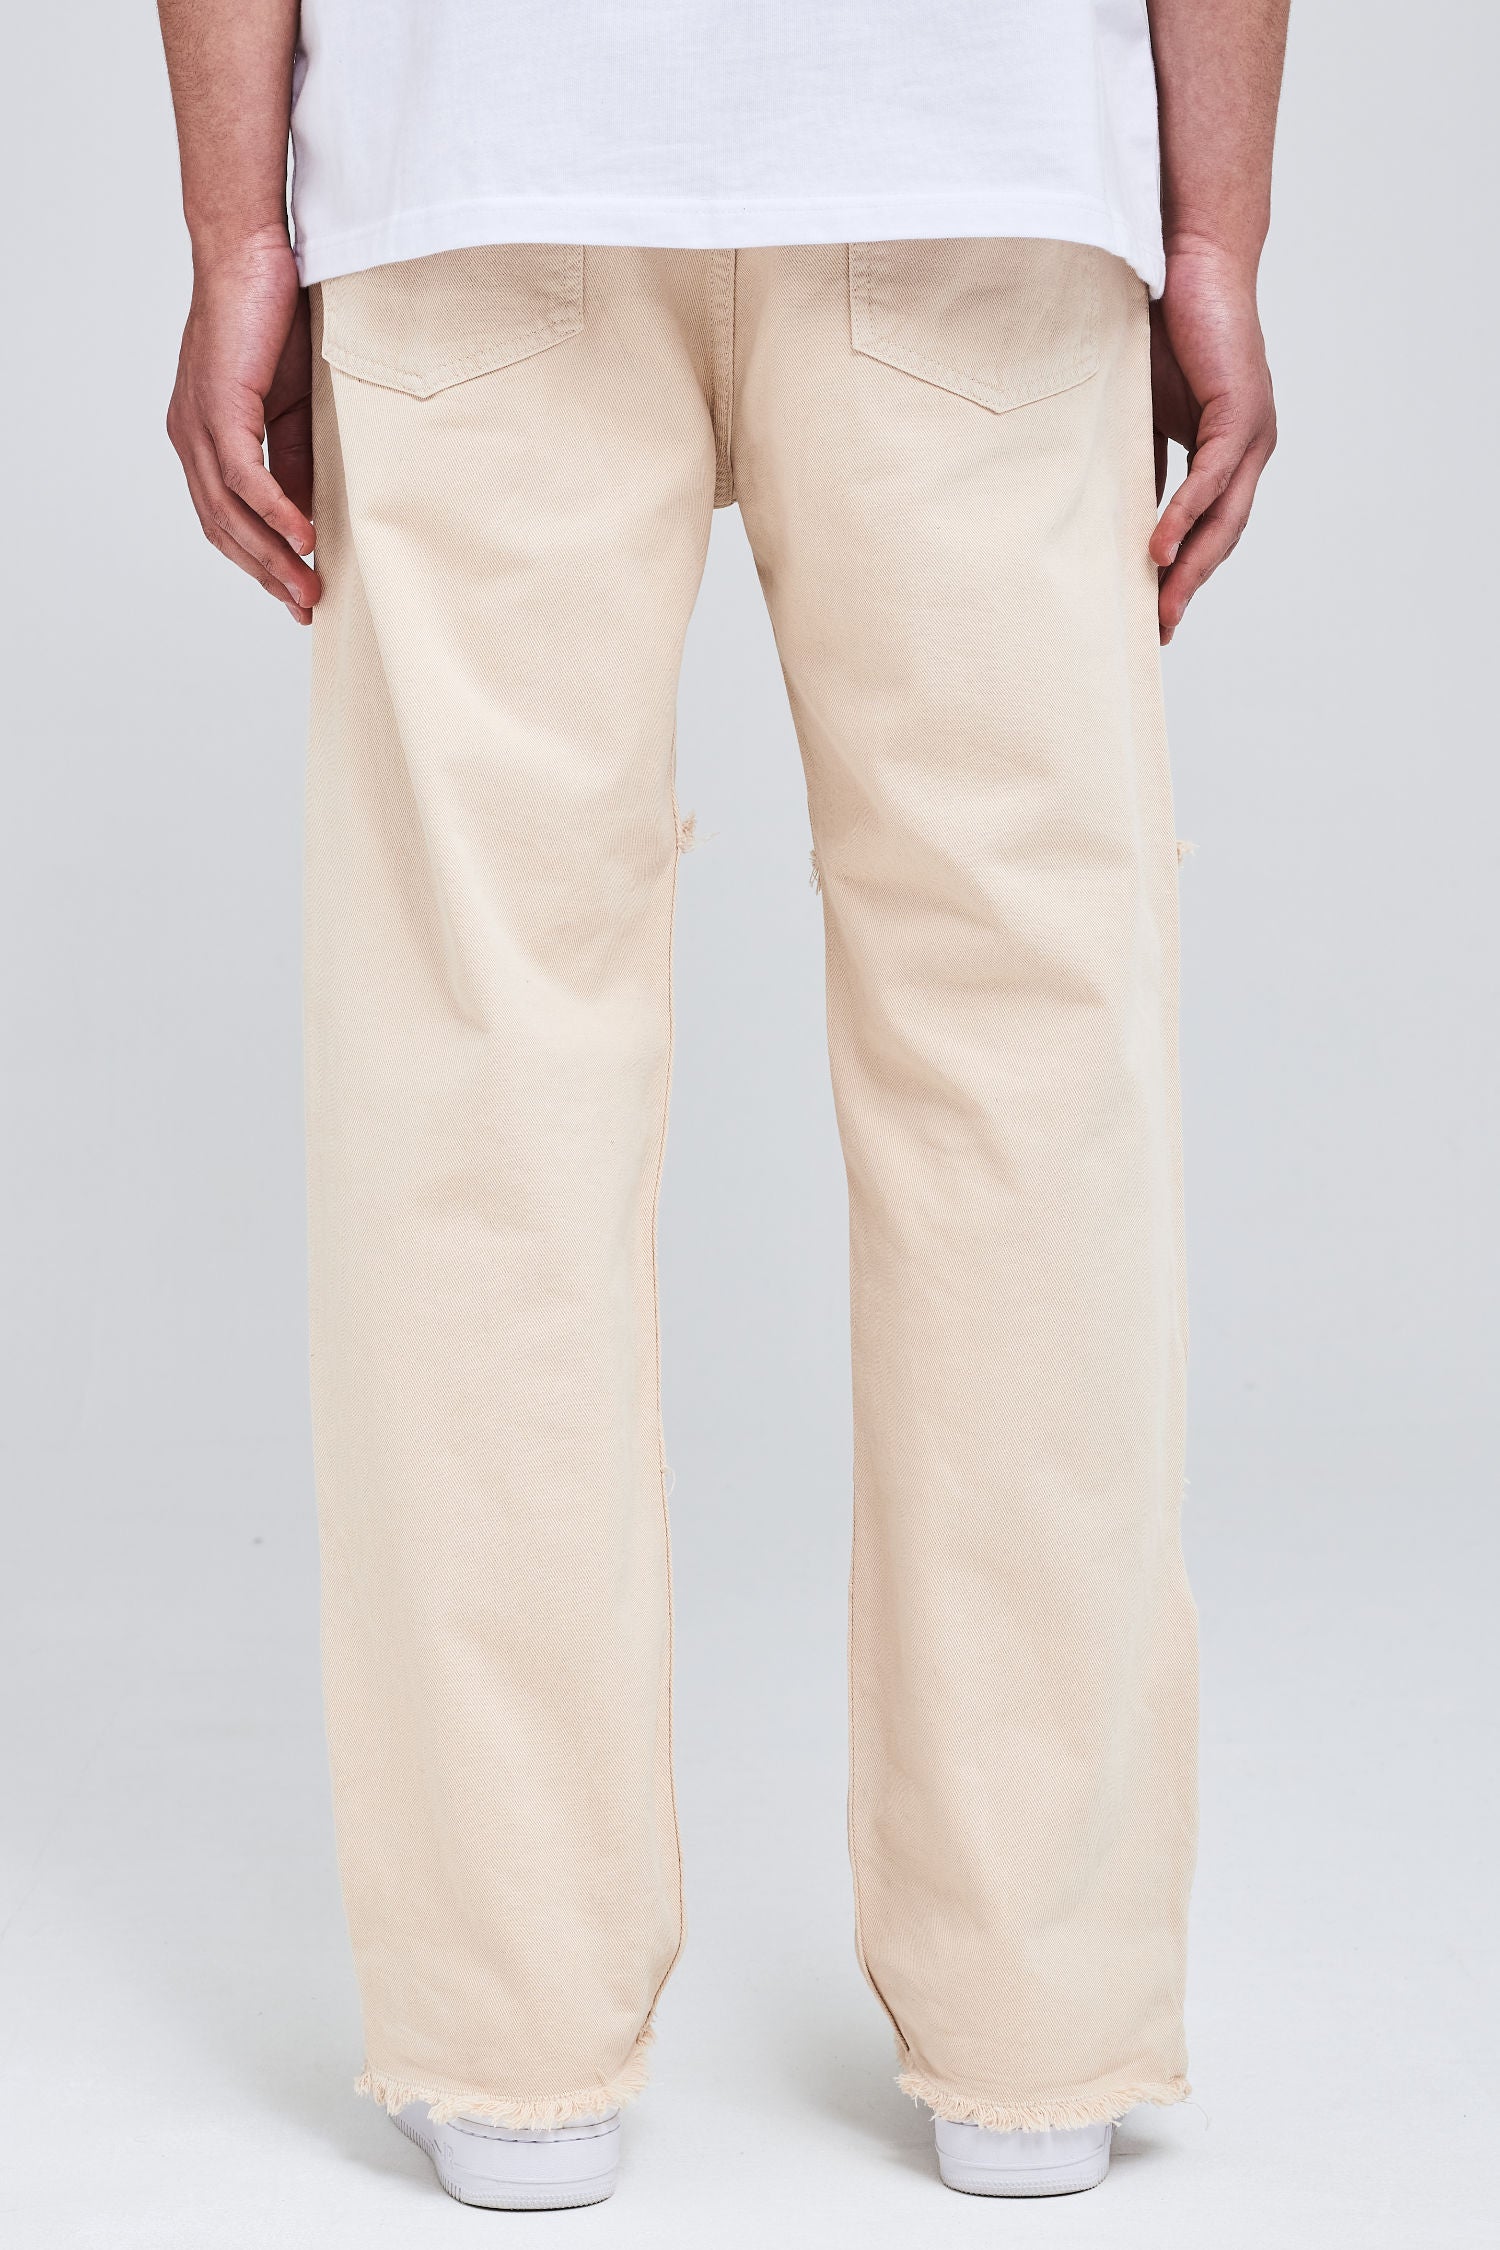 Conway Baggy Jeans Washed Light Cream Jeans | Men Modern Reality Men 